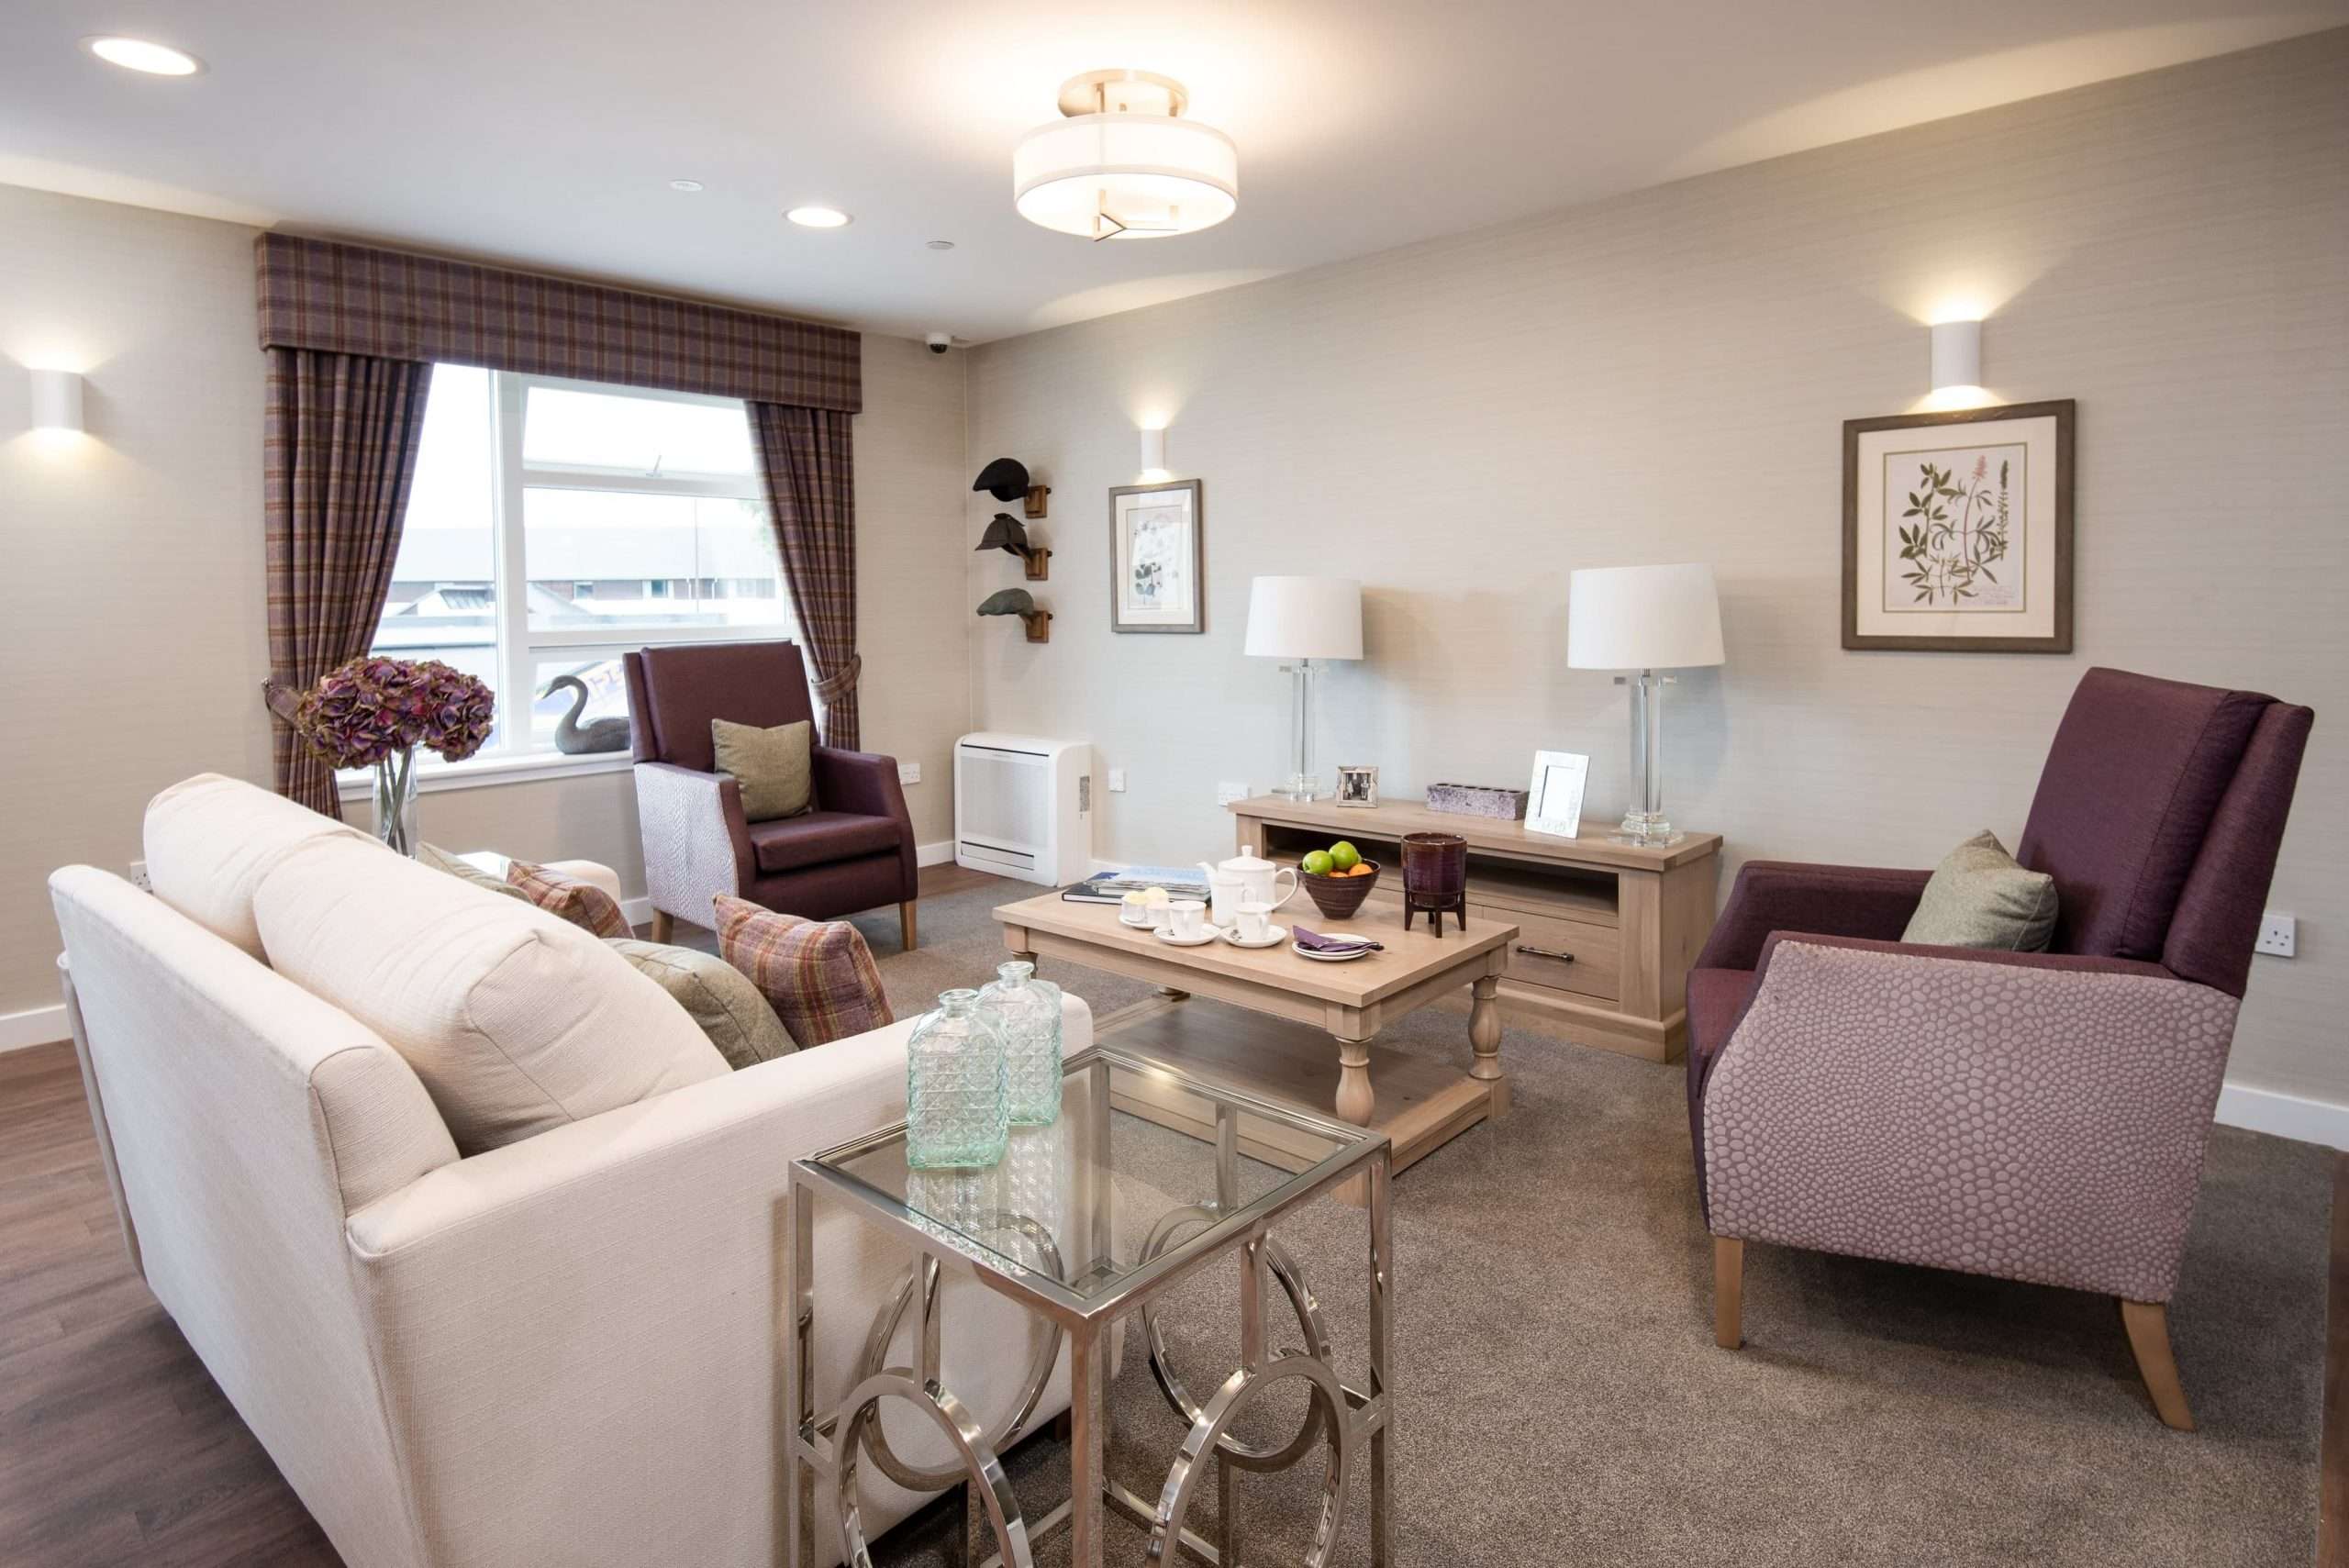 Lounge area with multiple chairs at care home